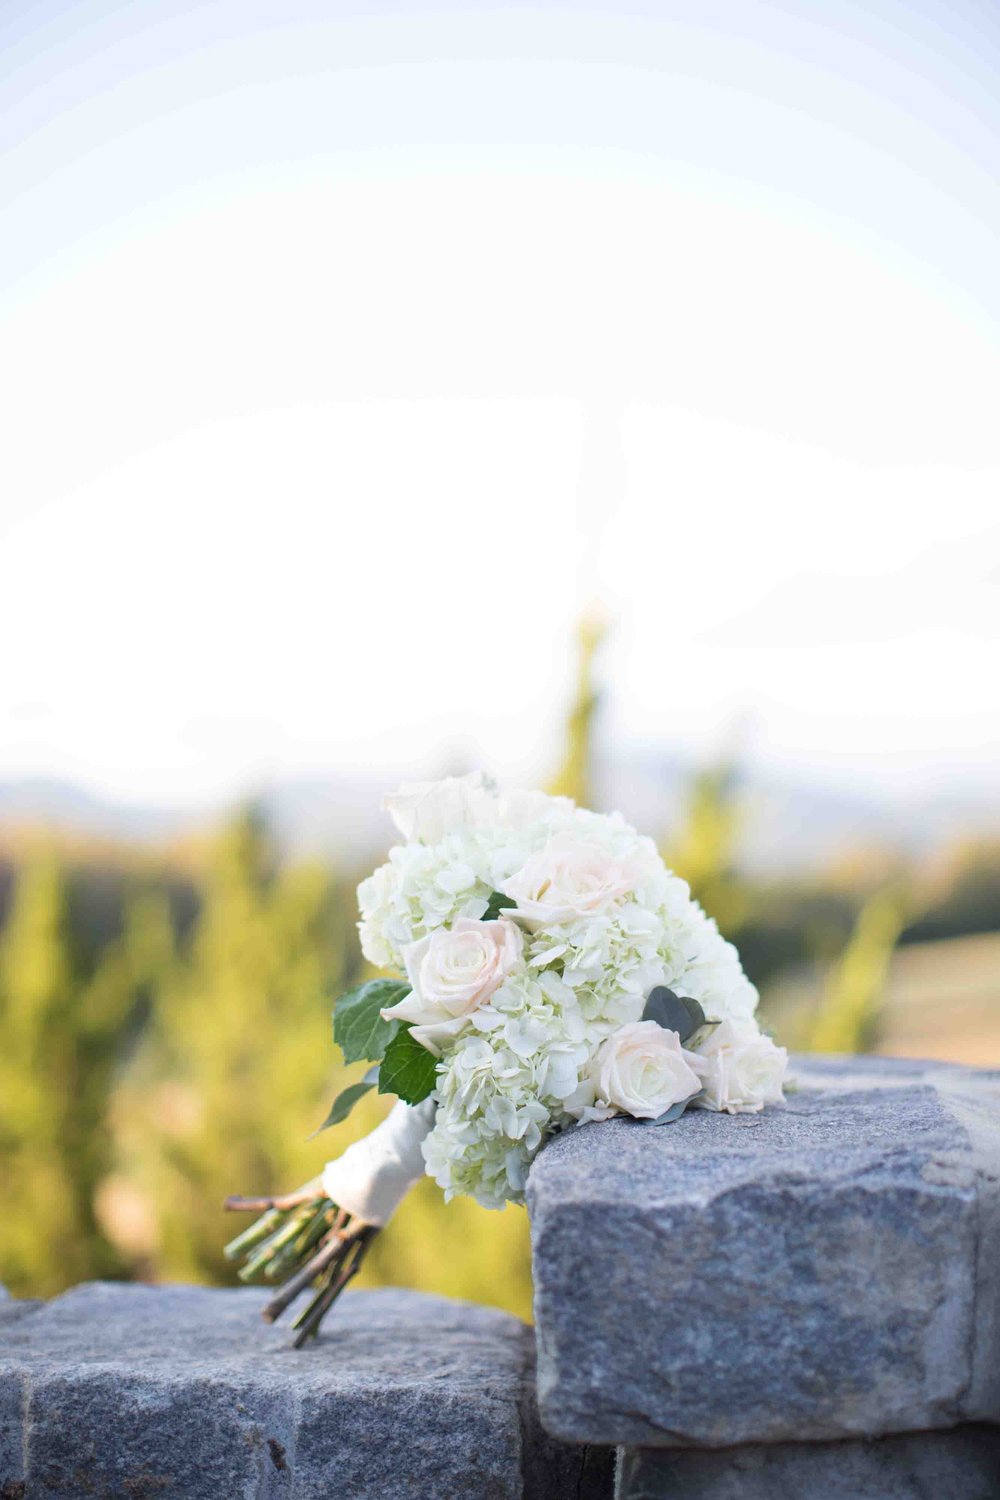 Flower Bouquet siting on stone wall